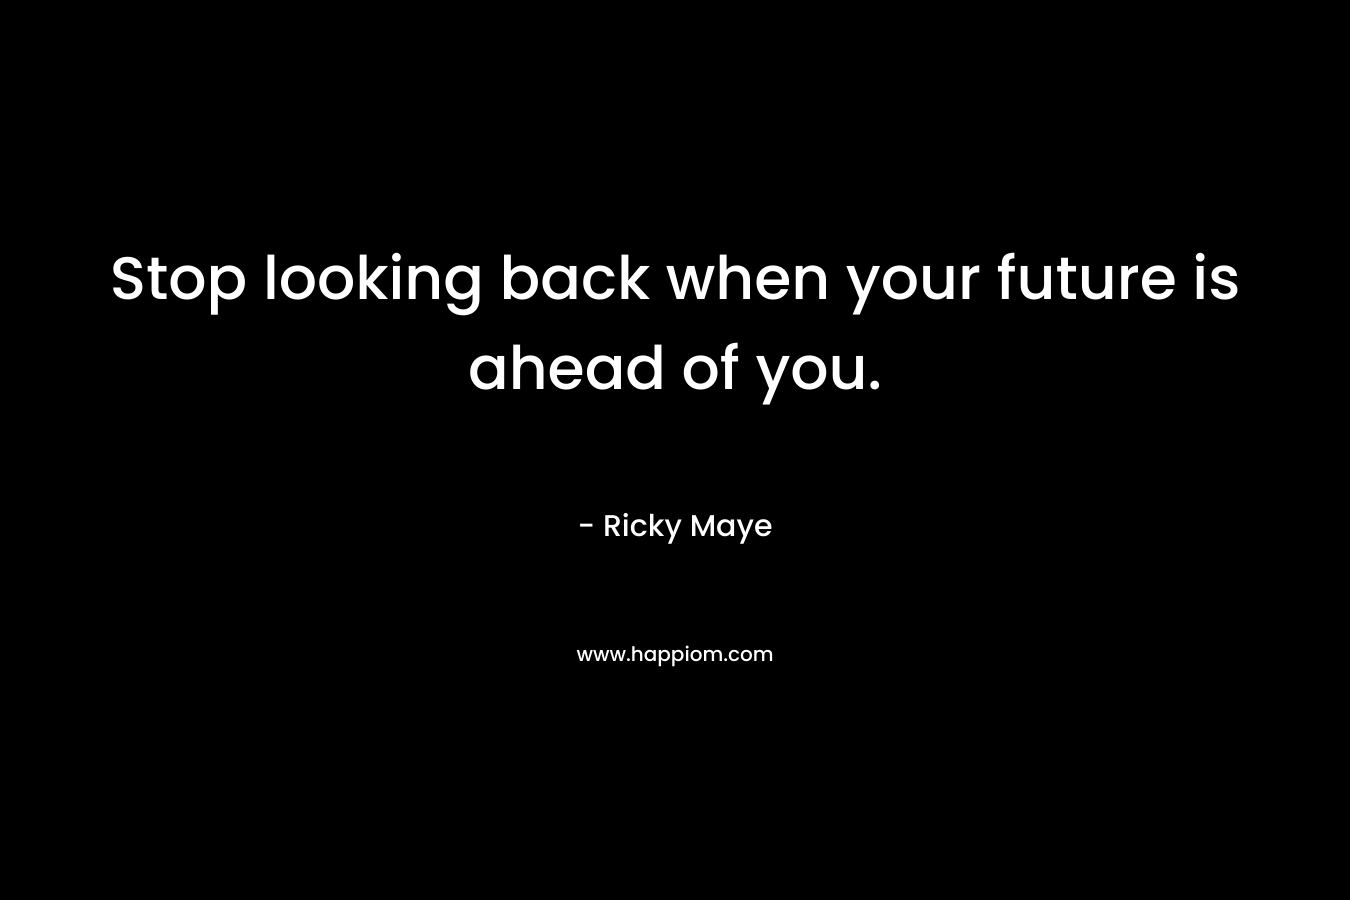 Stop looking back when your future is ahead of you.